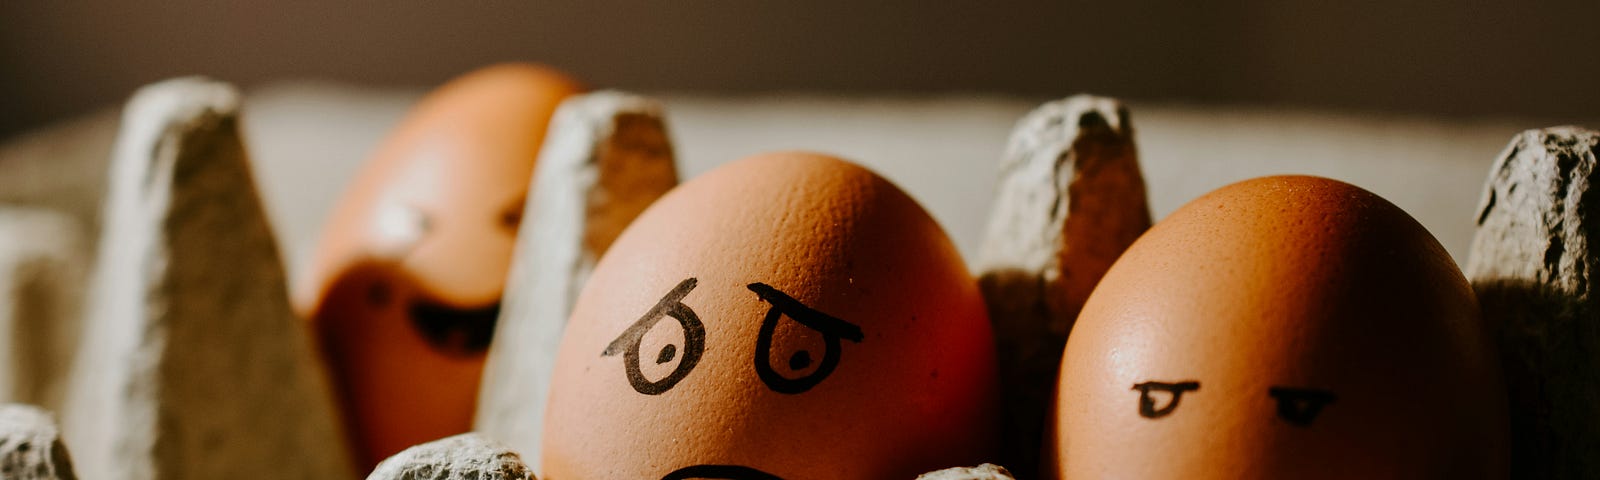 Three eggs in a carton with drawn faces displaying different emotions, representing anxiety and worry.